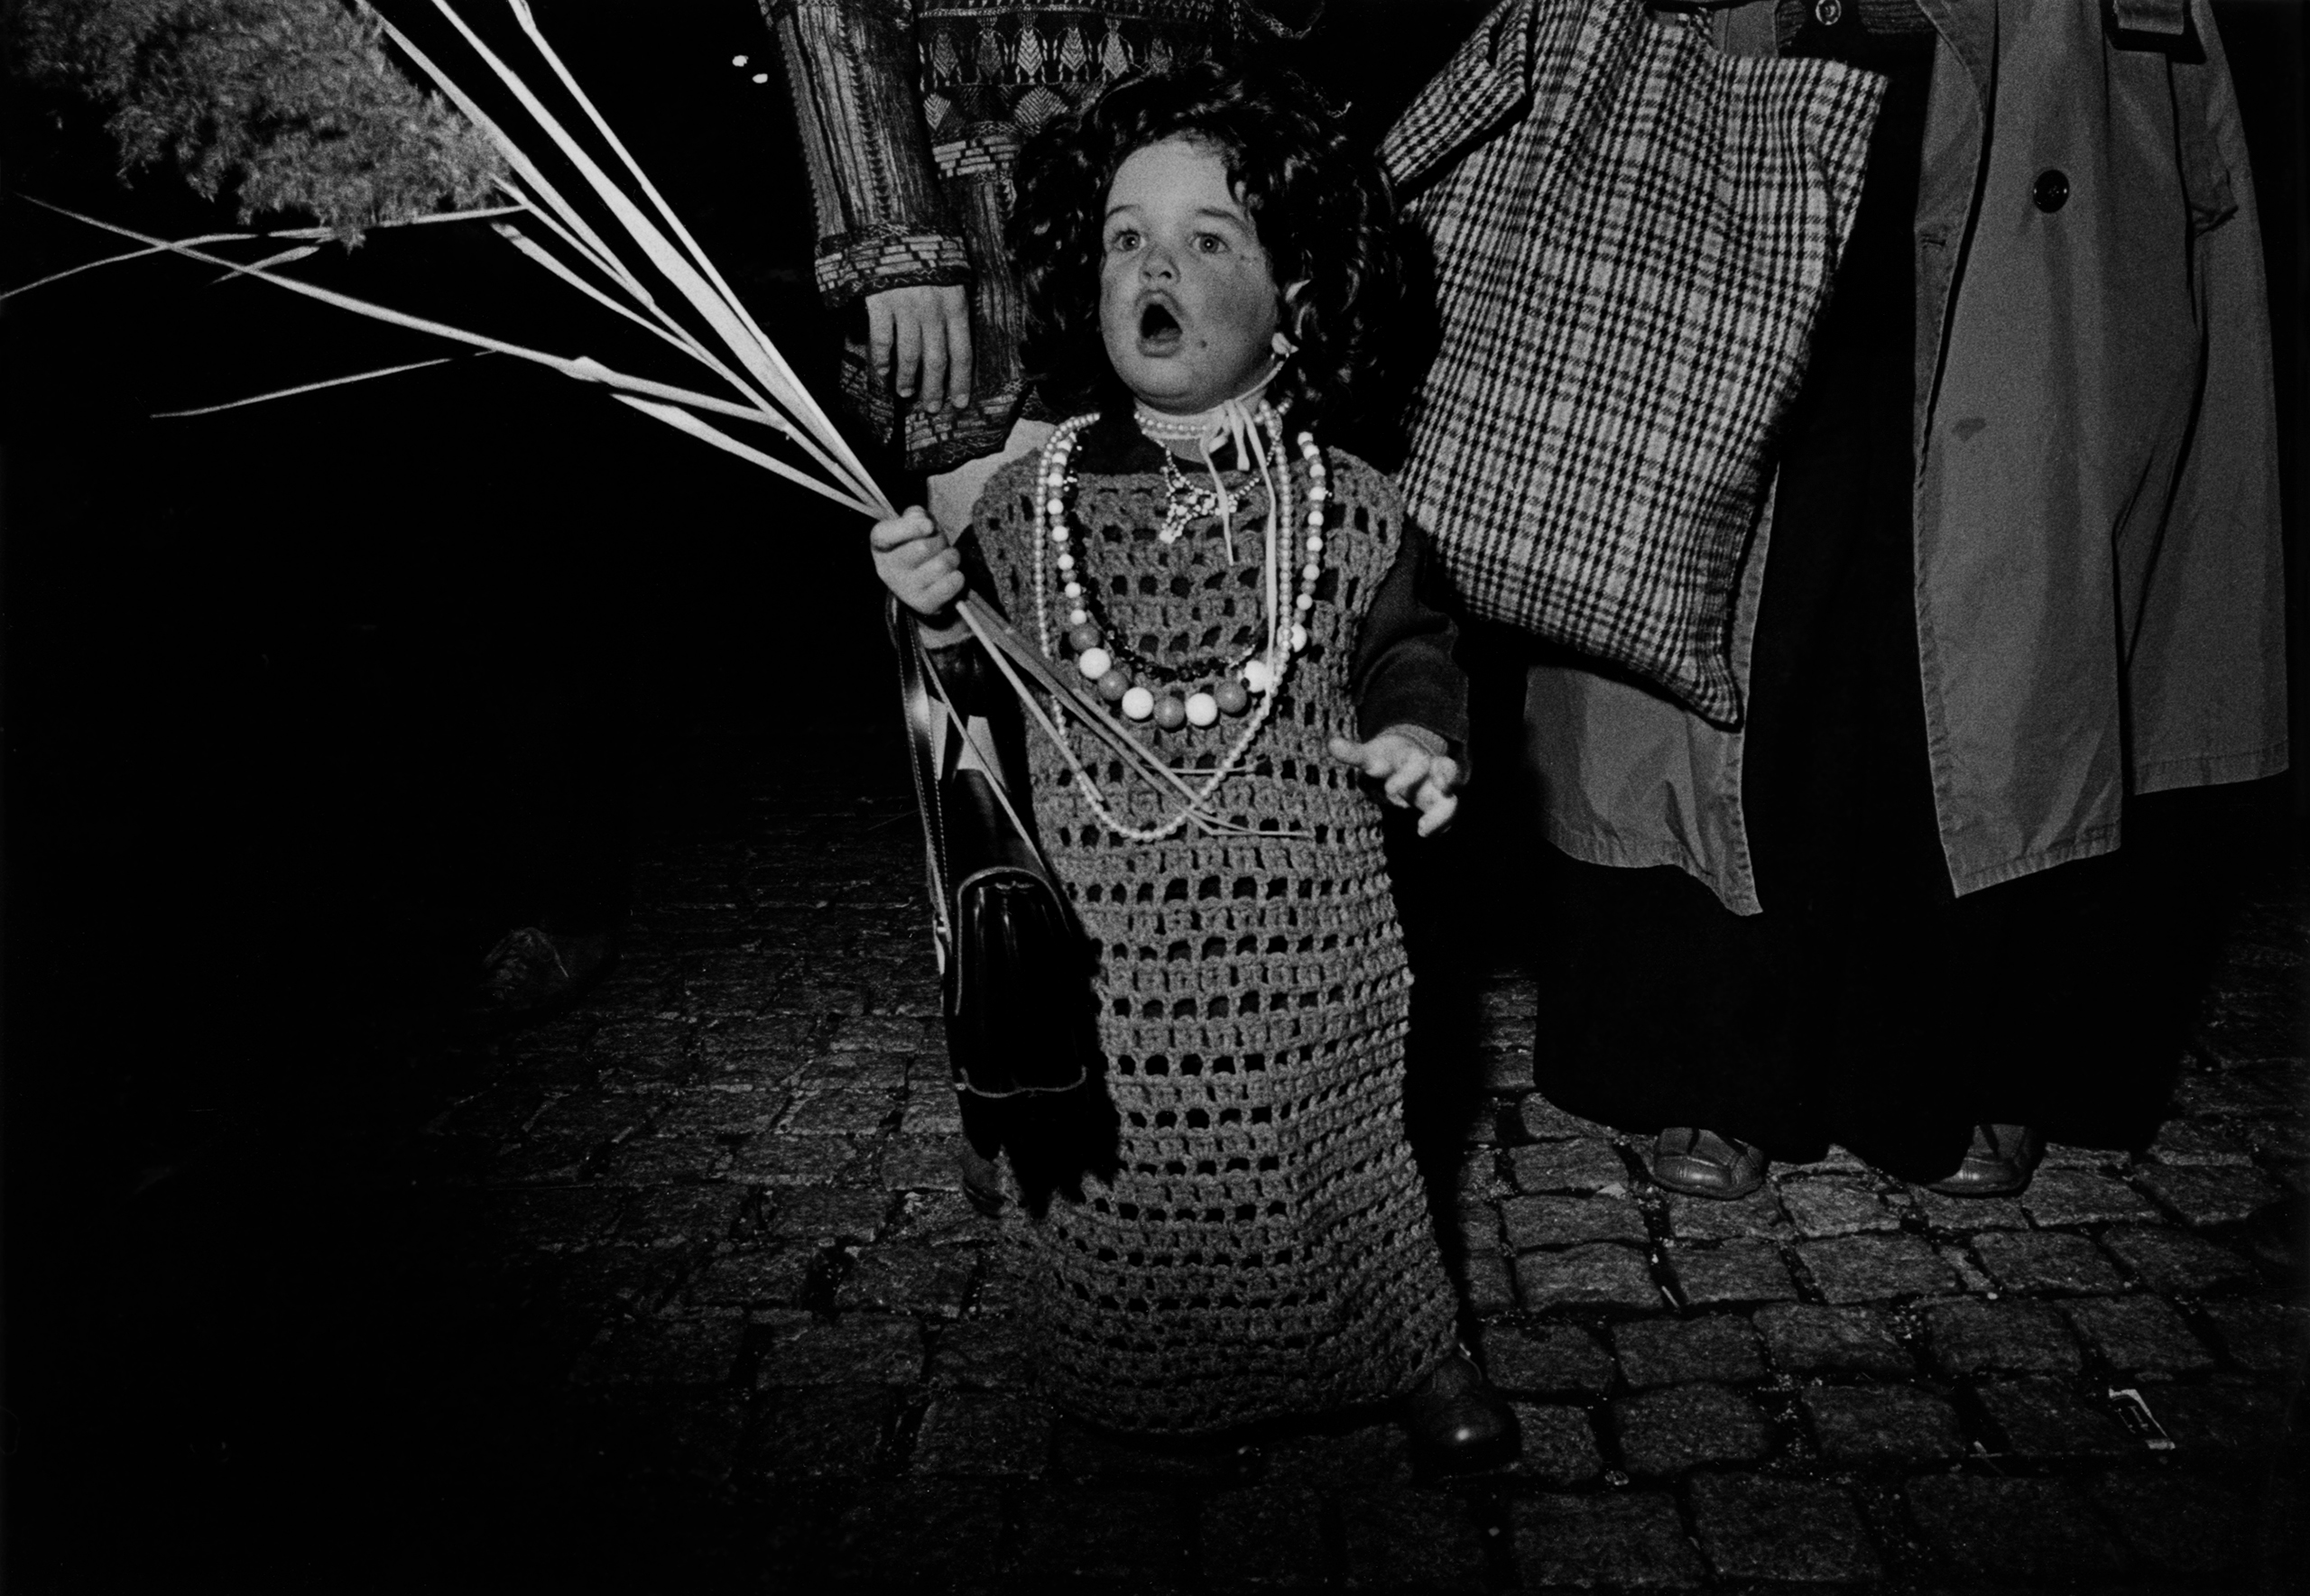 A young boy with balloons at the New York City Halloween Parade, 1976.